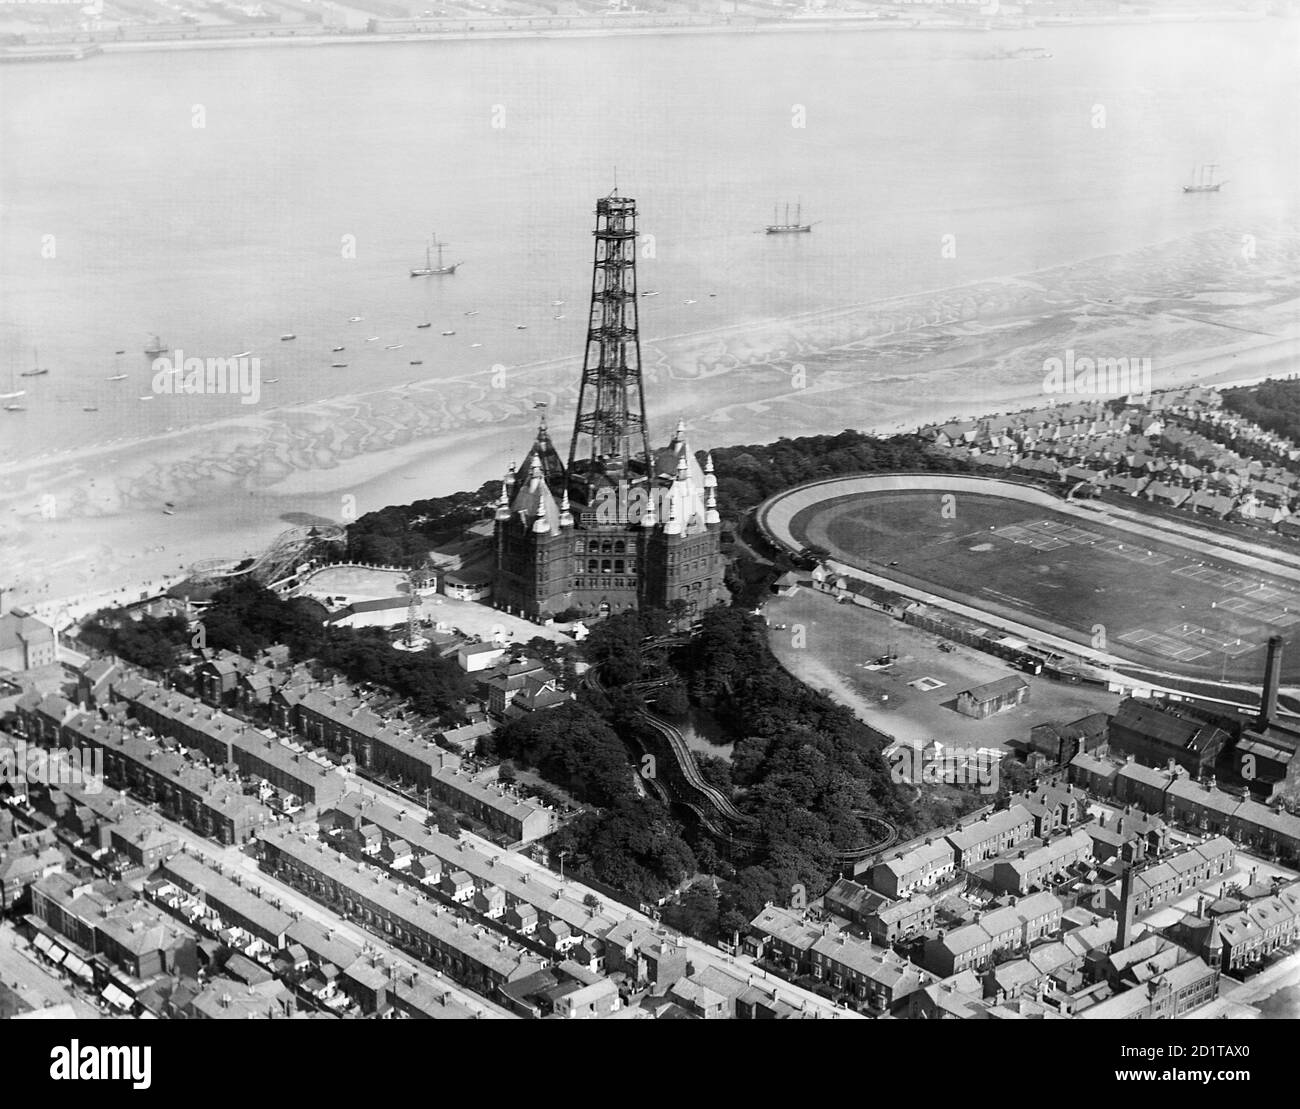 NEW BRIGHTON, Wallasey, Wirral, Merseyside. Aerial view of New Brighton Tower being removed. Constructed in 1896 as an observation tower, it was closed during the First World War. Due to corrosion it was deemed unsafe to reopen and it was dismantled. After its removal in 1921 the ballroom continued to be a popular venue until destroyed by fire in 1969. Photographed in 1920. Aerofilms Collection (see Links). Stock Photo